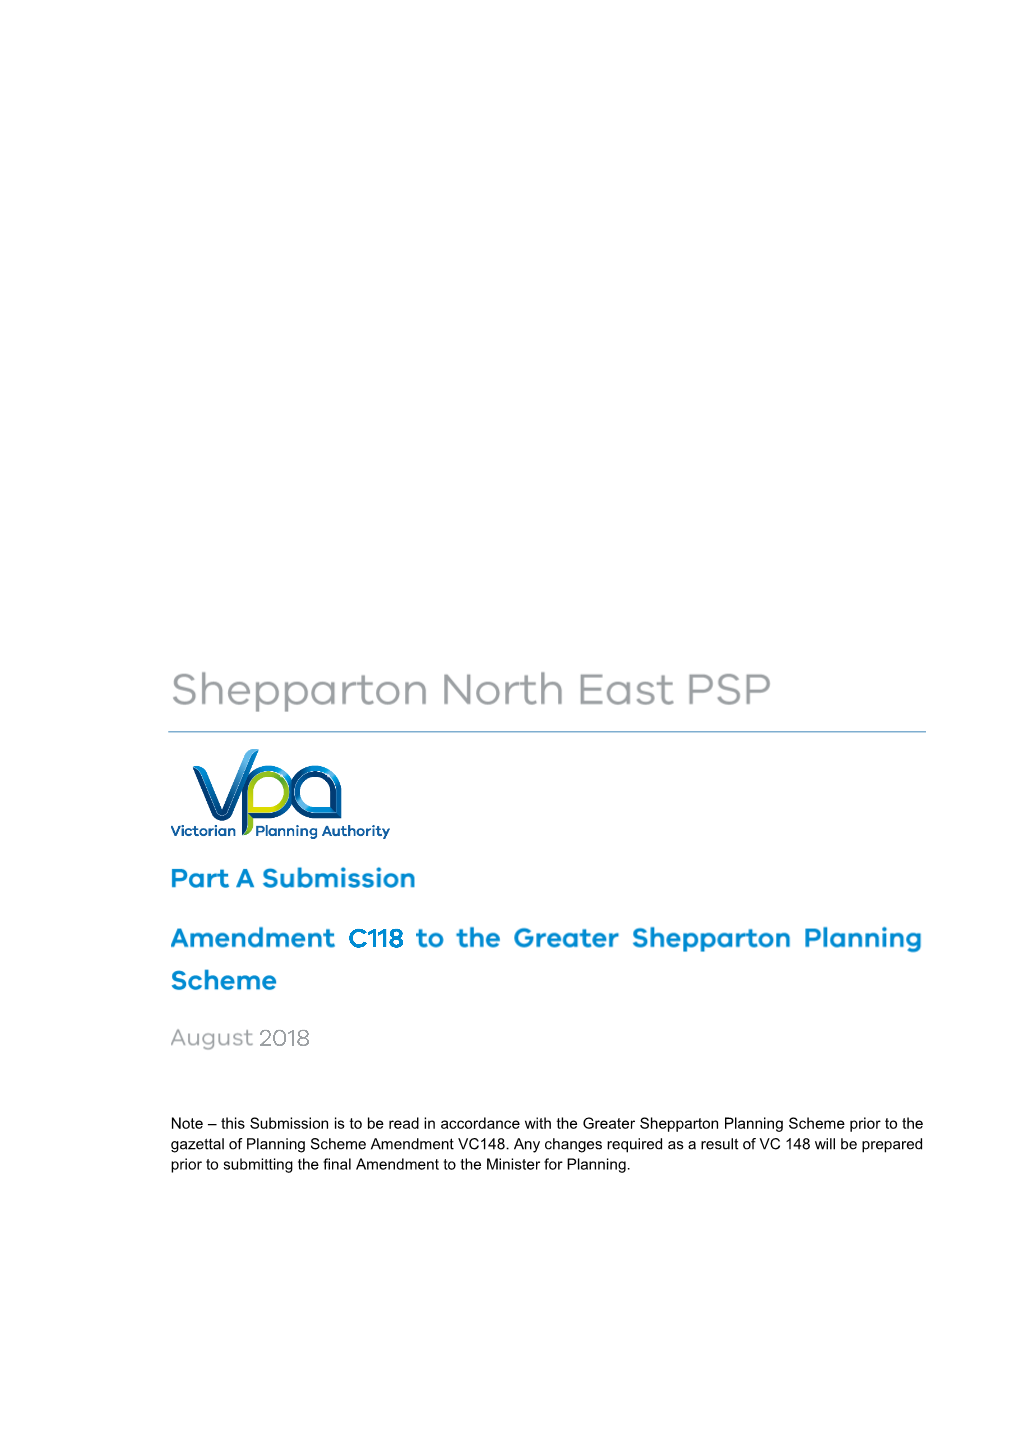 Note – This Submission Is to Be Read in Accordance with the Greater Shepparton Planning Scheme Prior to the Gazettal of Planning Scheme Amendment VC148